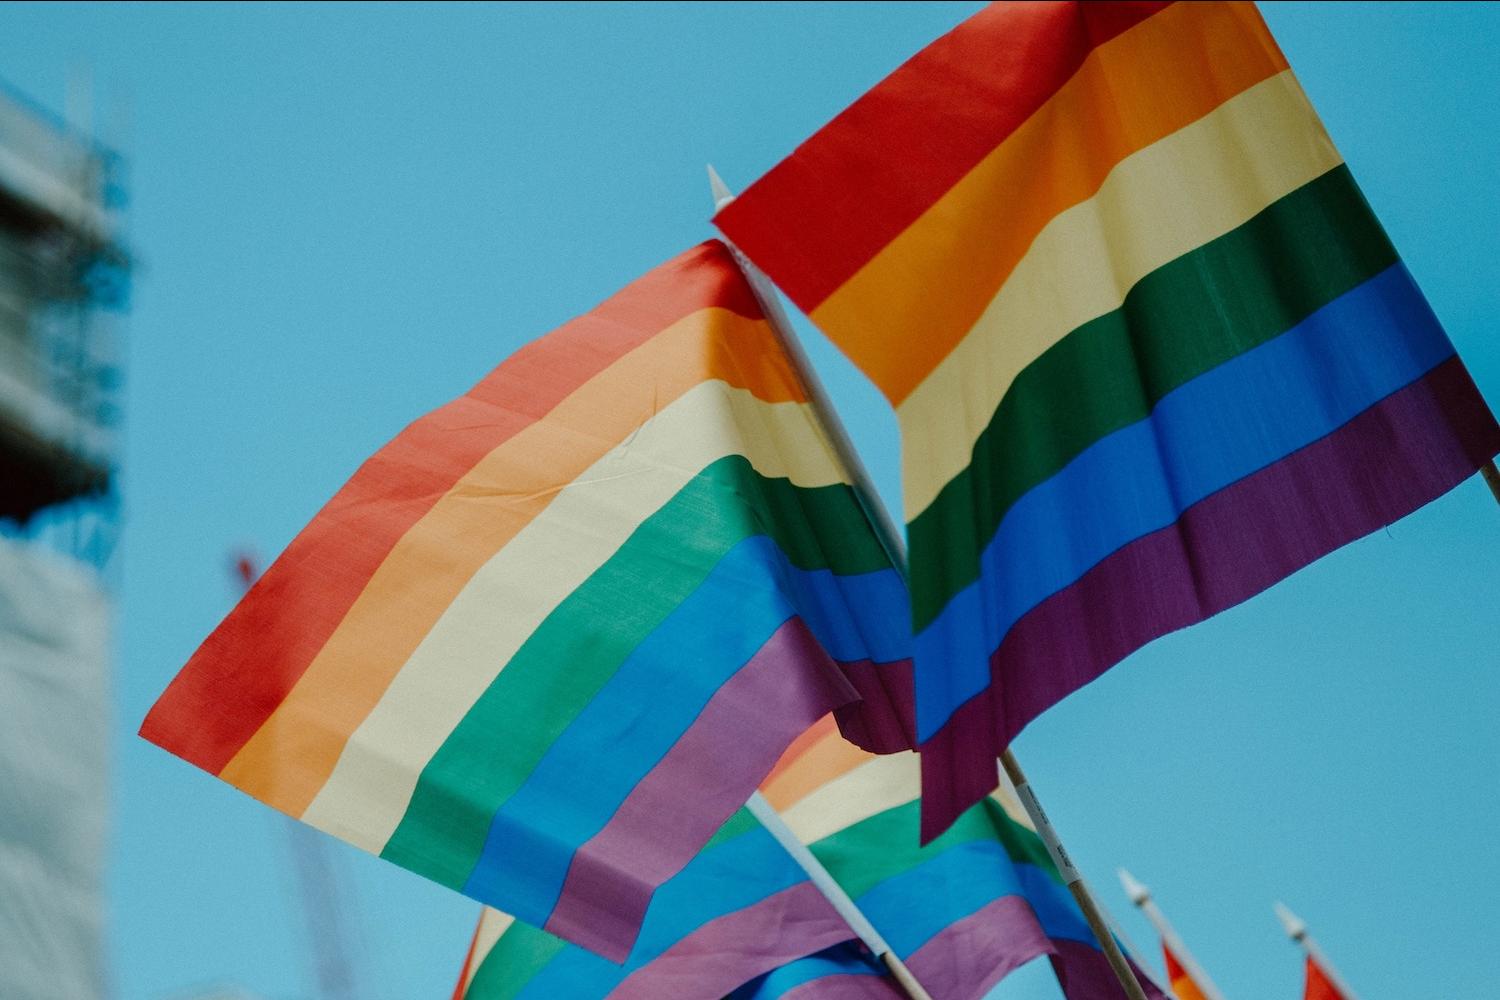 lgbtq+ pride flags against blue sky background